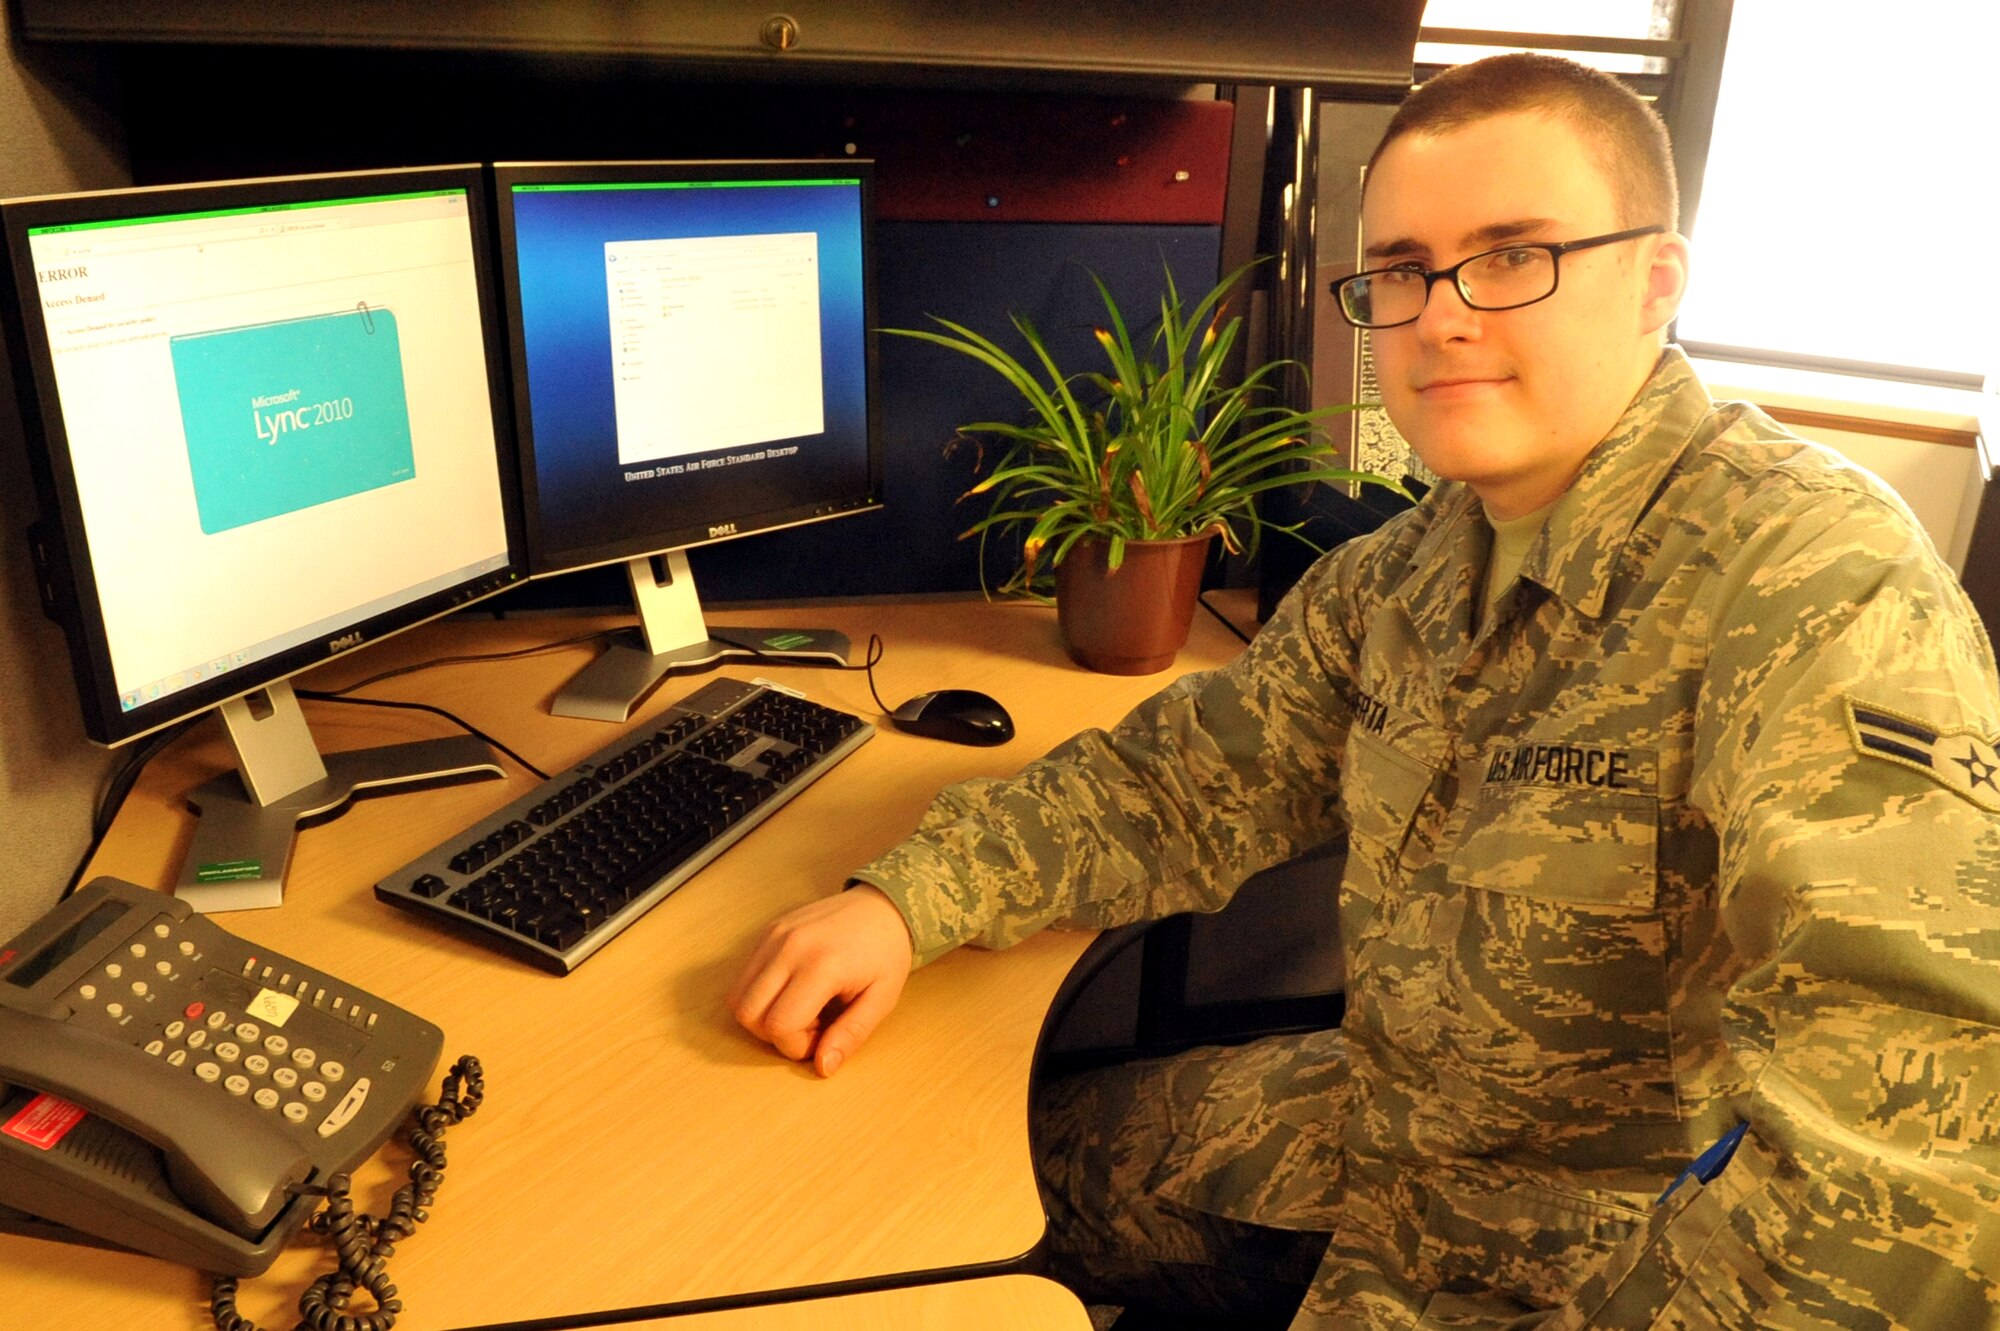 Airman 1st Class Nicholas Berta, 319th Comptroller Squadron, logs into his work station Jan. 21, 2015, on Grand Forks Air Force Base, N.D. Berta was selected as the Warrior of the Week for the fourth week of January. (U.S. Air Force photo/Staff Sgt. Susan L. Davis)